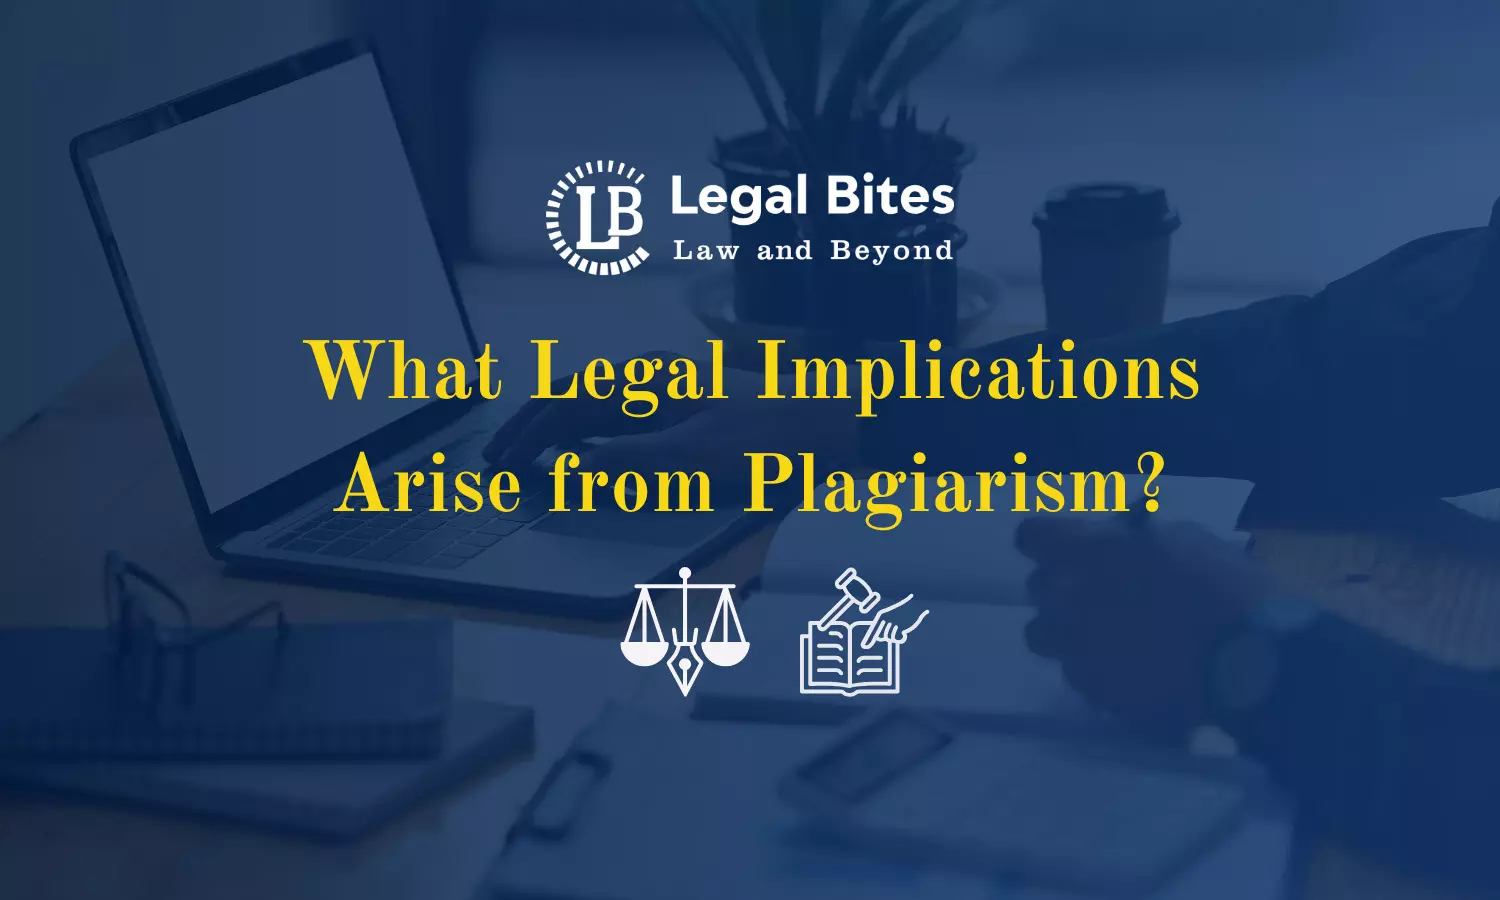 What Legal Implications Arise from Plagiarism?